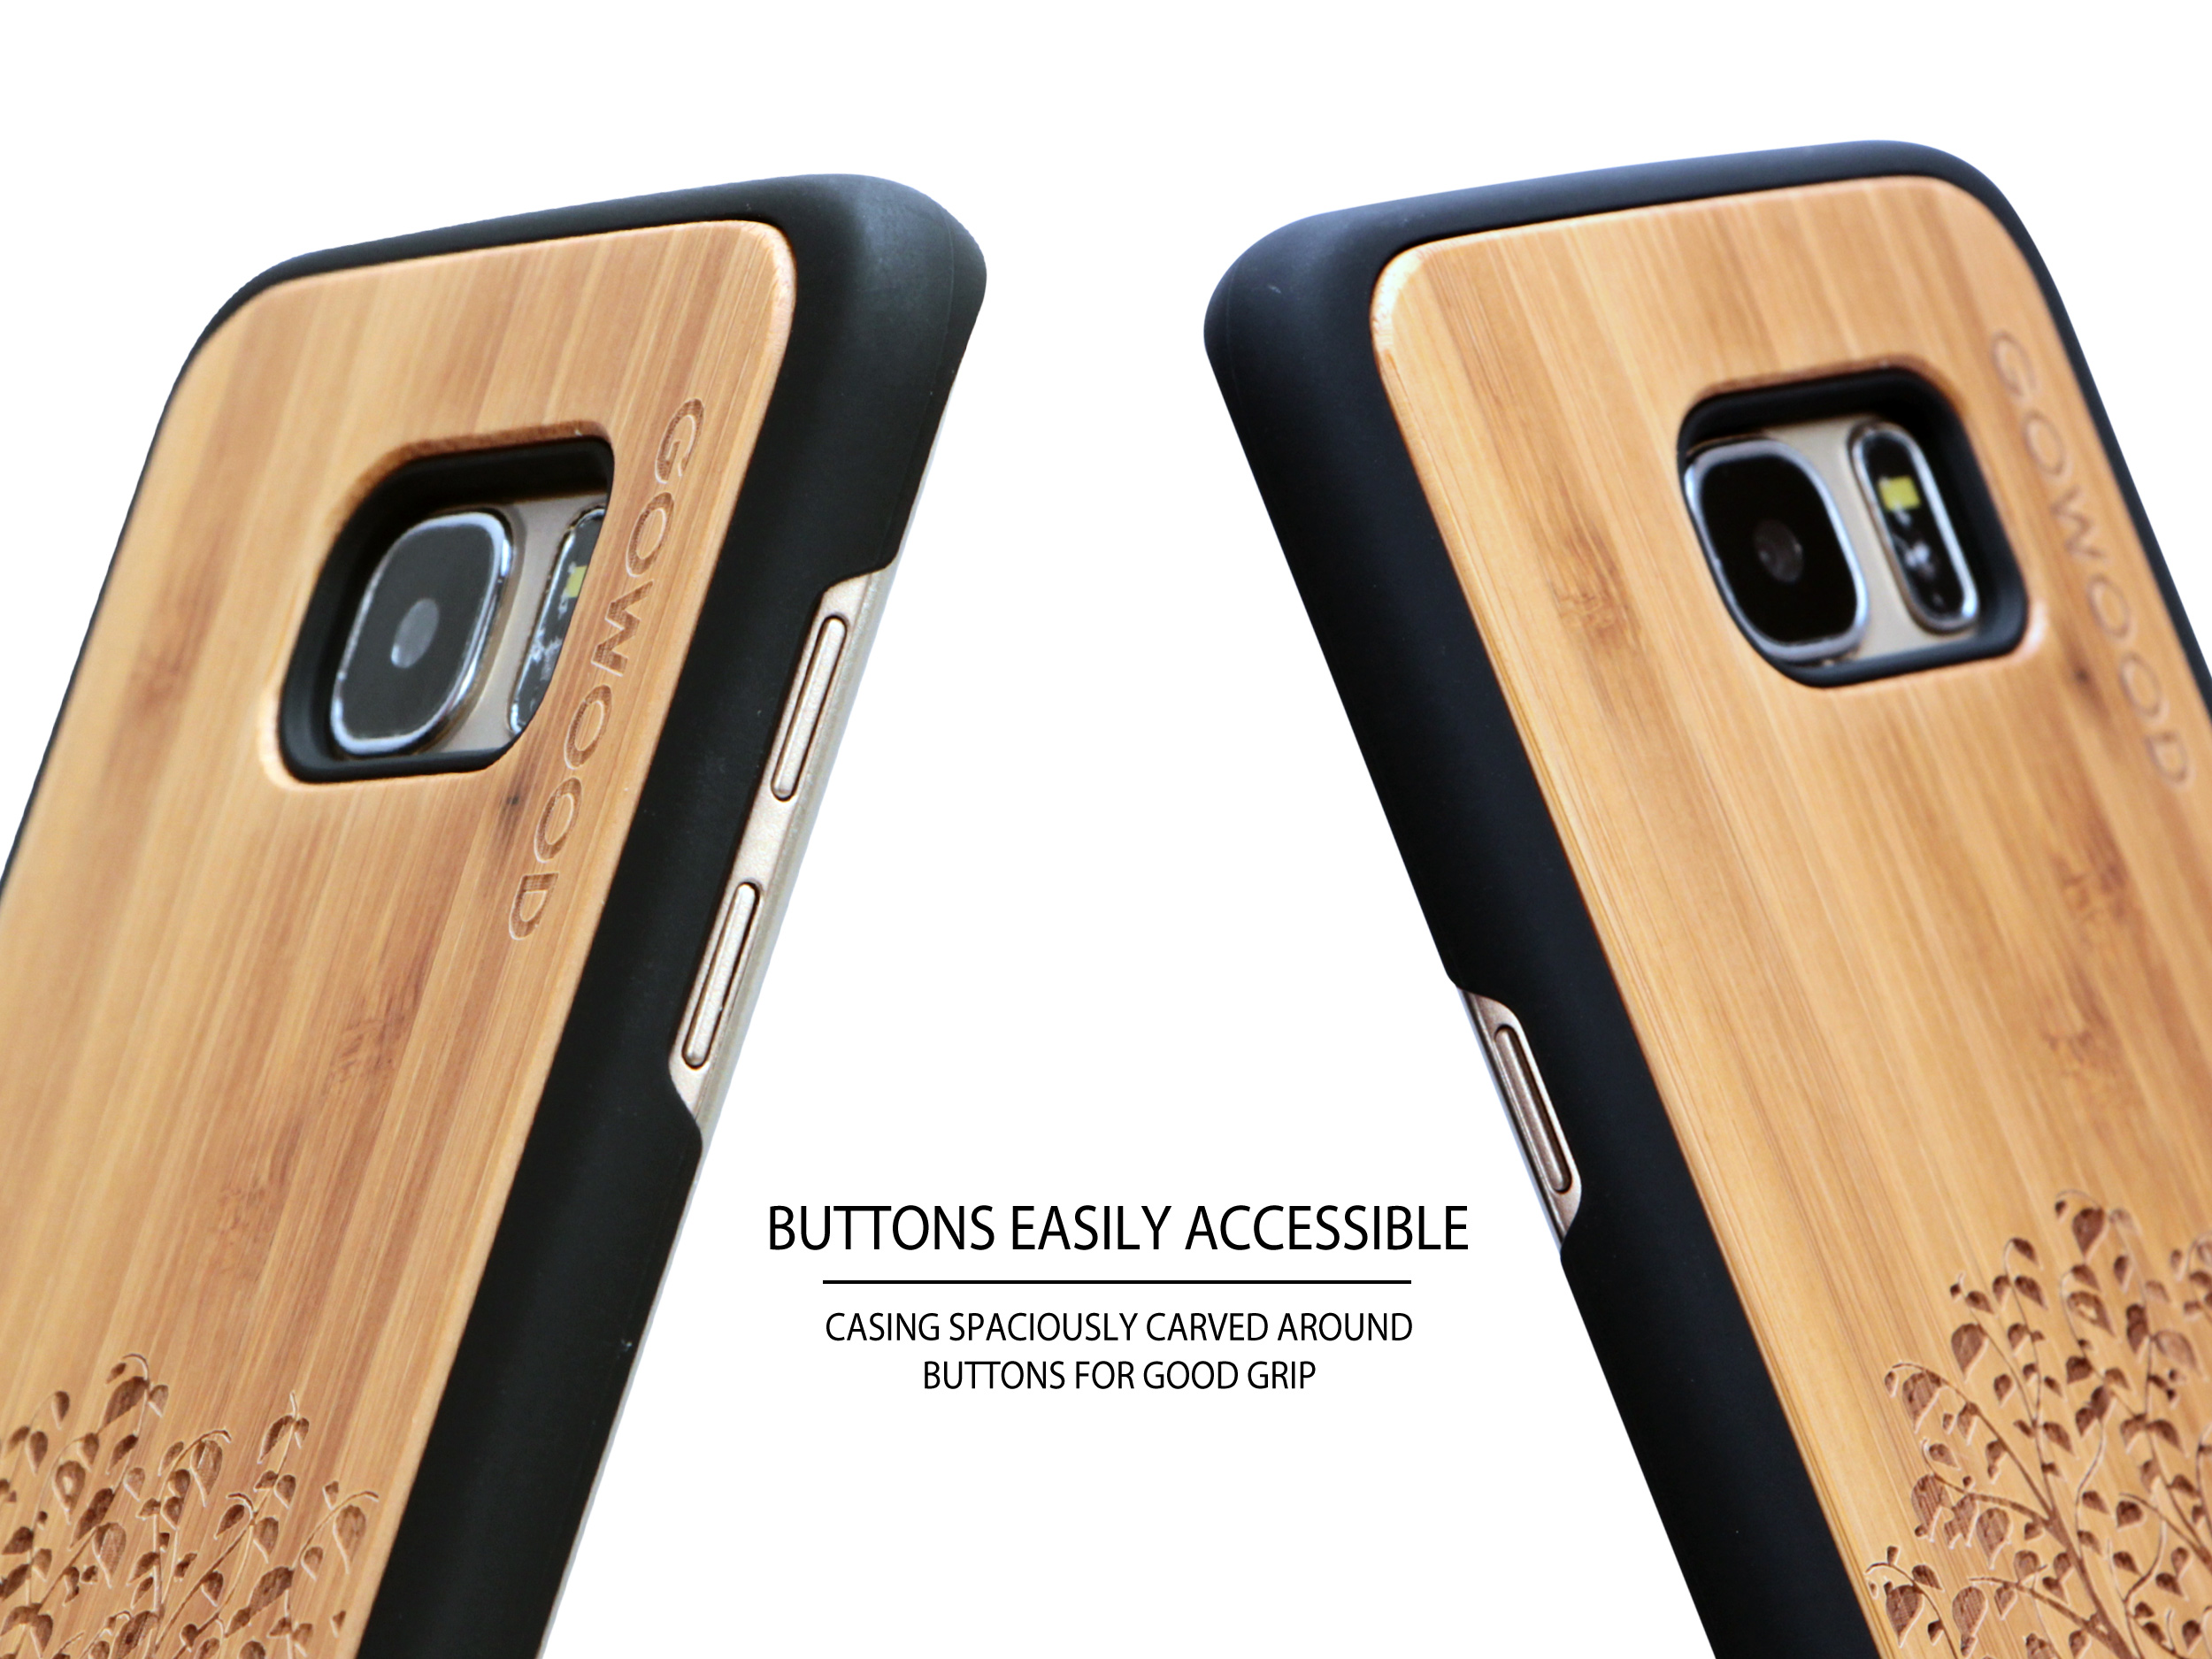 Samsung Galaxy S7 Edge wood case tree buttons